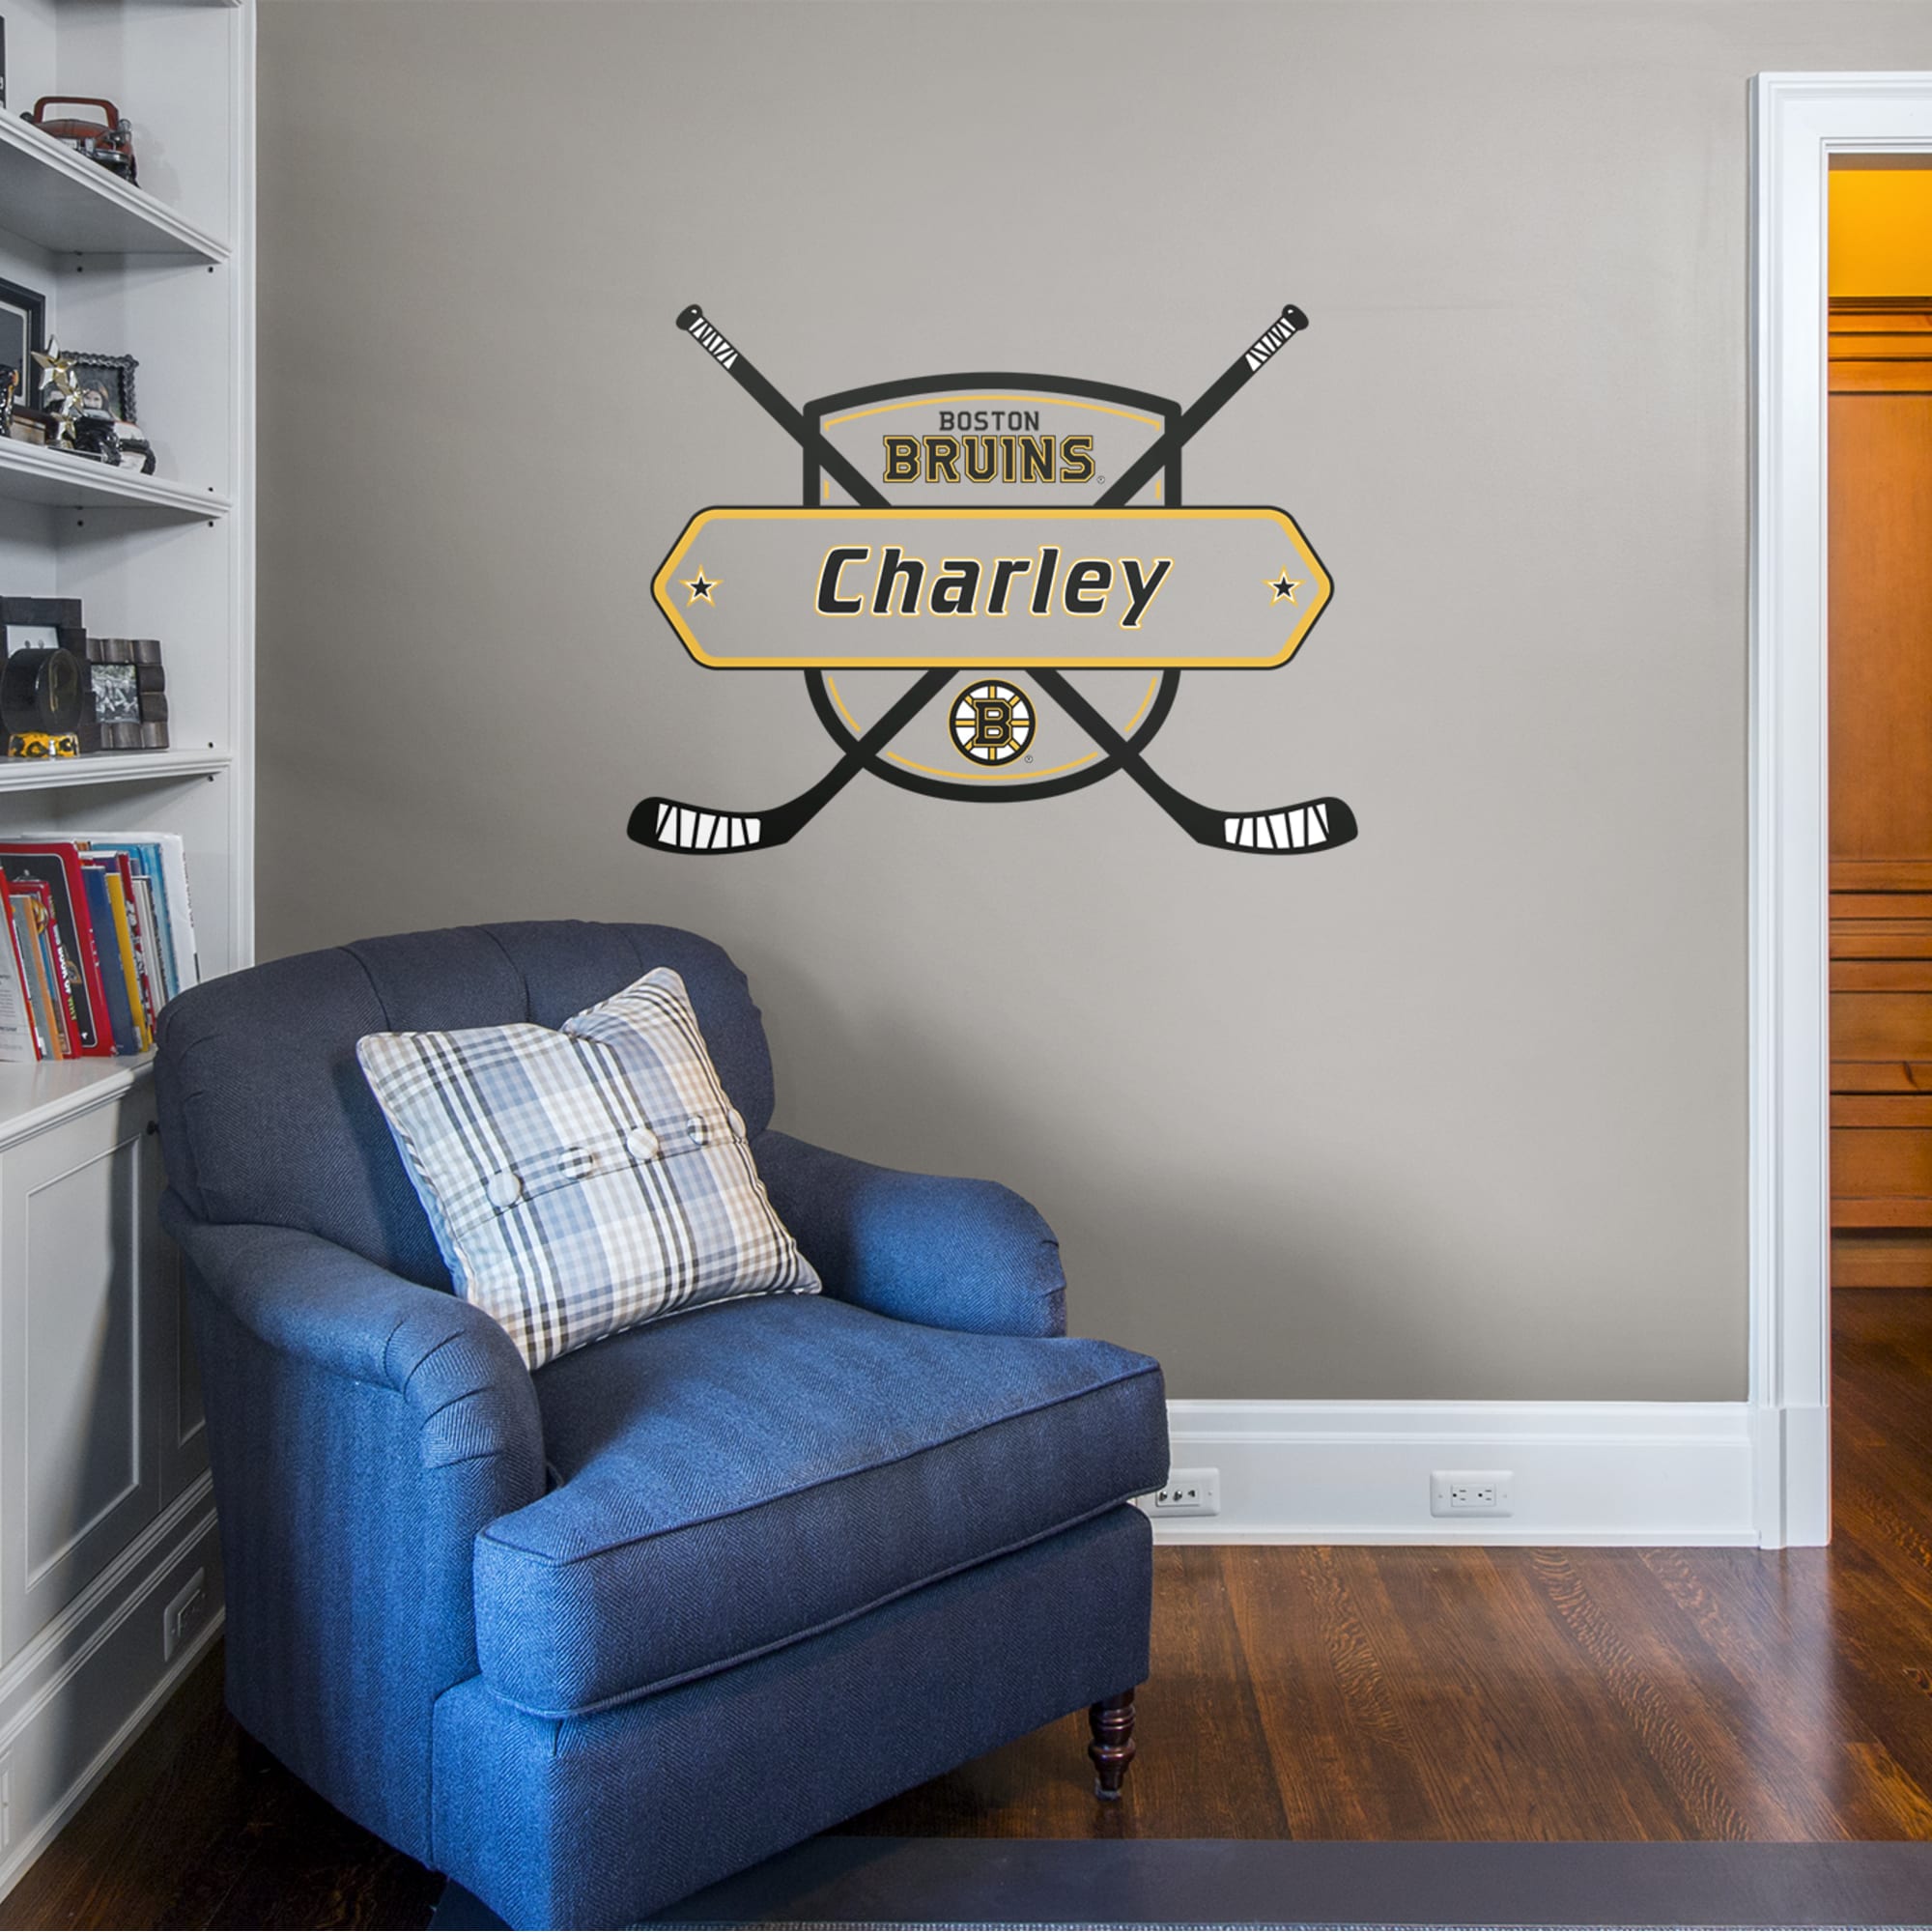 Boston Bruins: Personalized Name - Officially Licensed NHL Removable Wall Decal 51.0"W x 38.0"H by Fathead | Vinyl